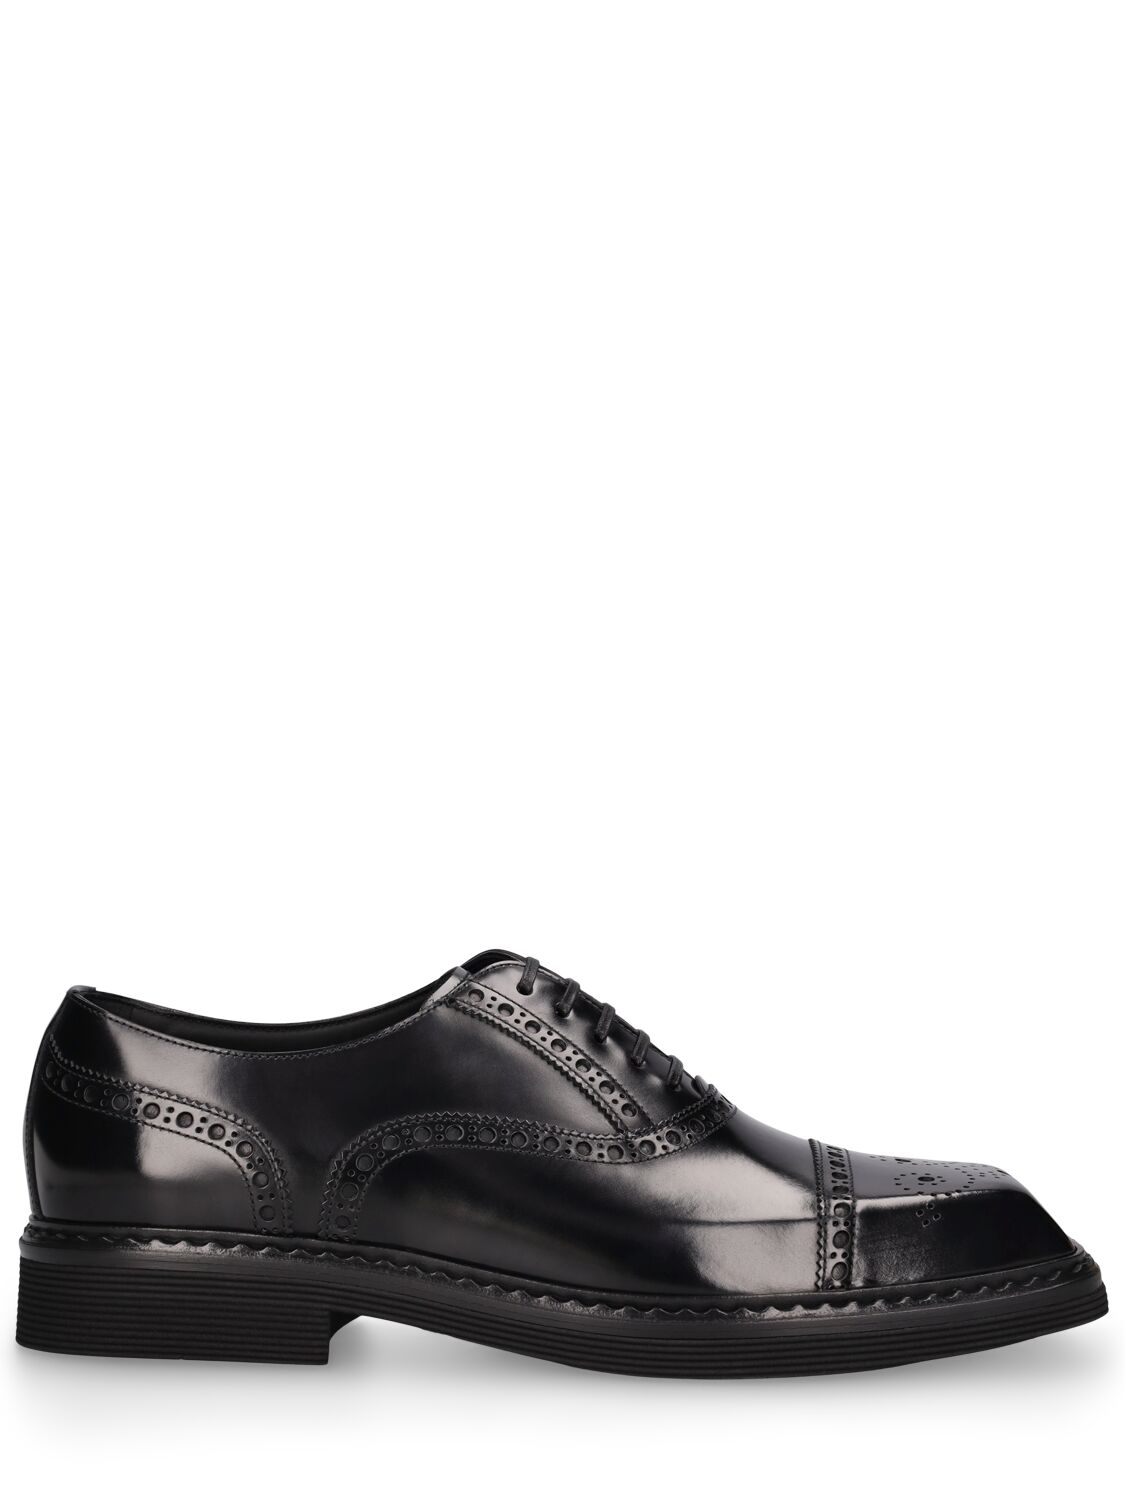 Dolce & Gabbana City Trek Squared Derby Lace-up Shoes In Black